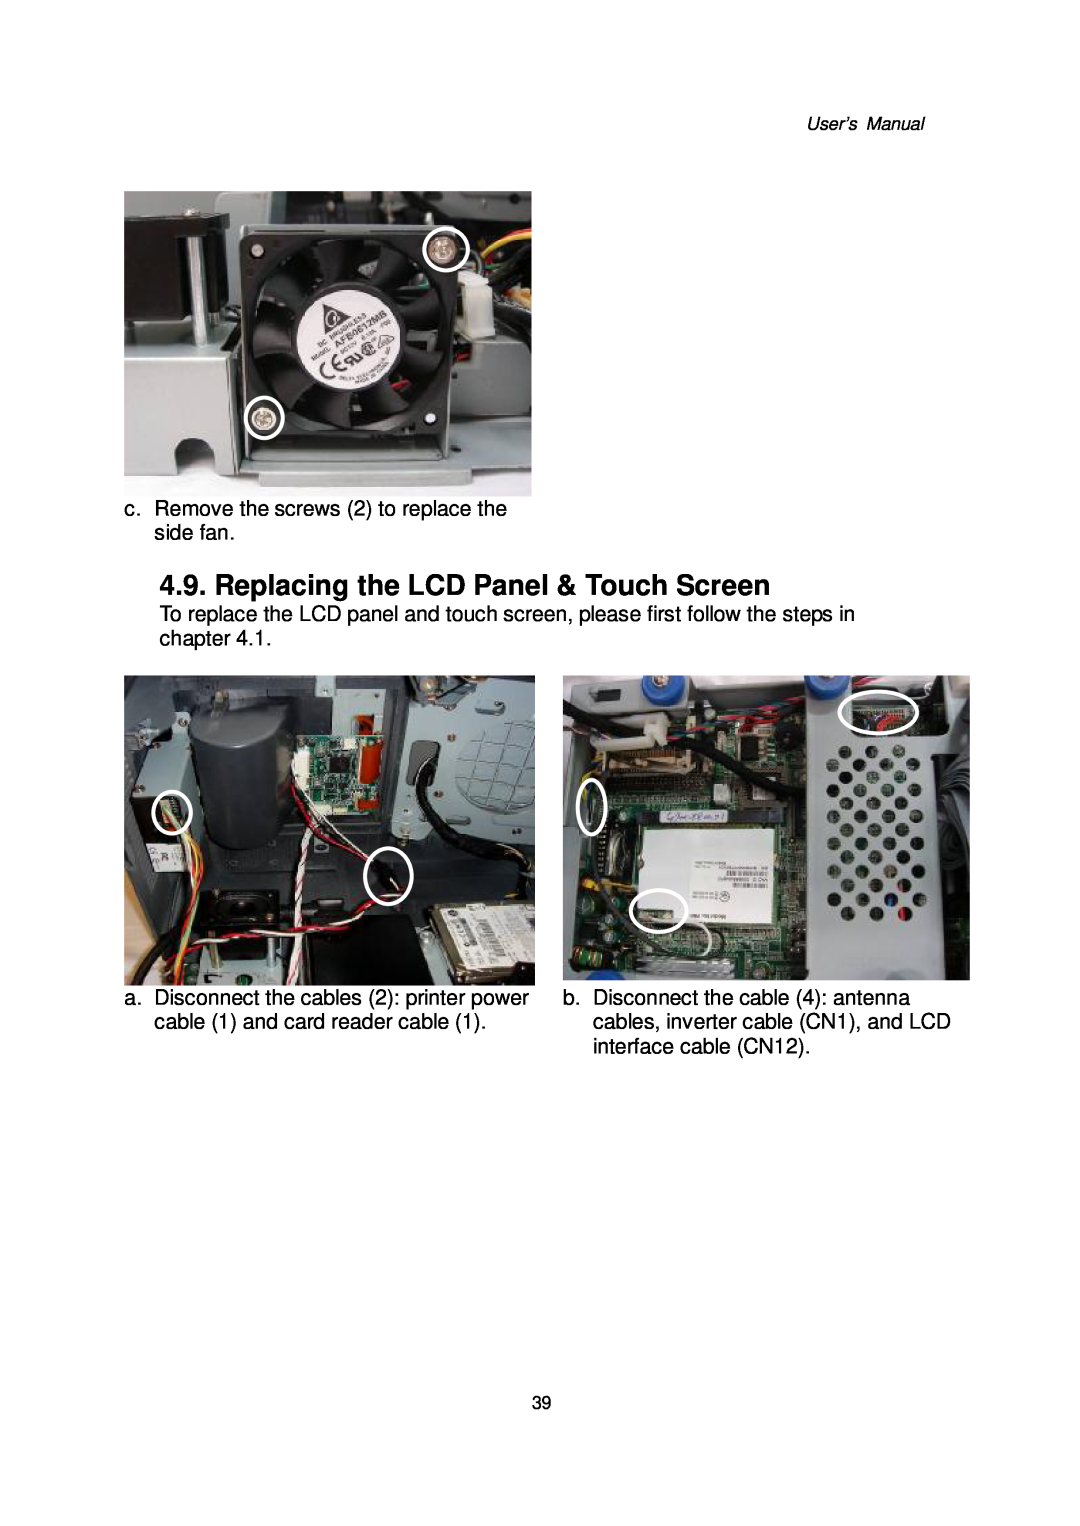 Intel Kiosk Hardware System, 48201201 user manual Replacing the LCD Panel & Touch Screen 